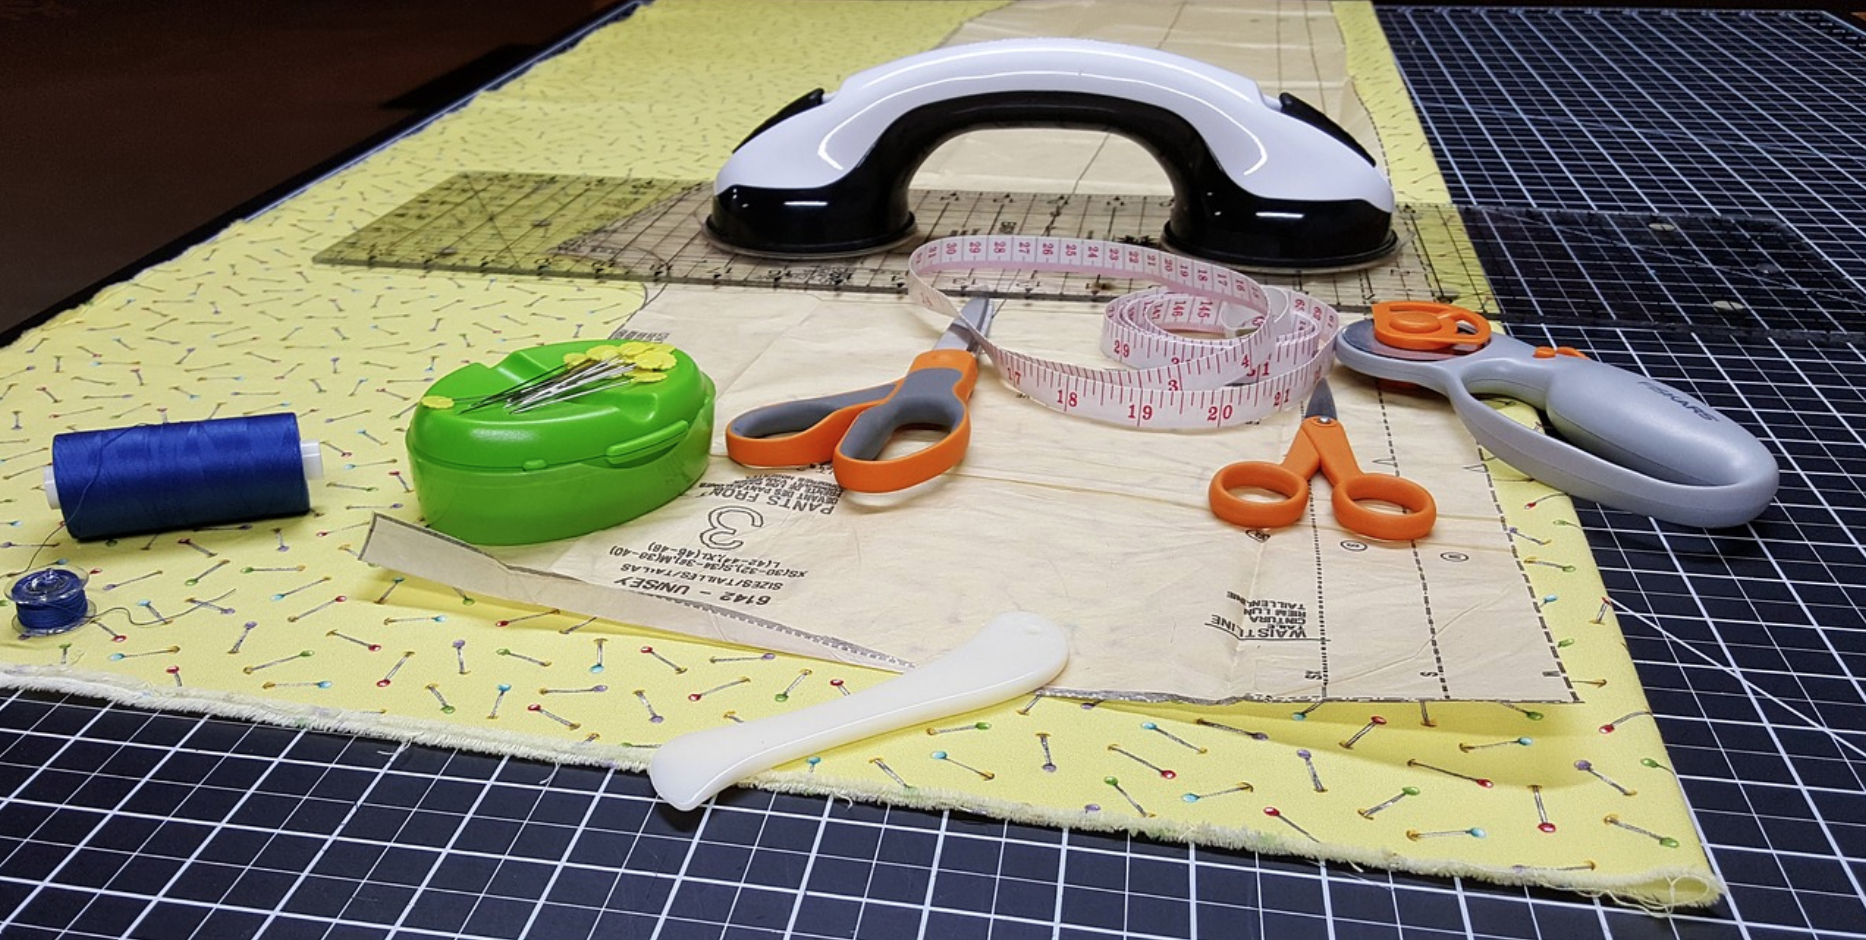 Rotary cutter with fabric and sewing equipment